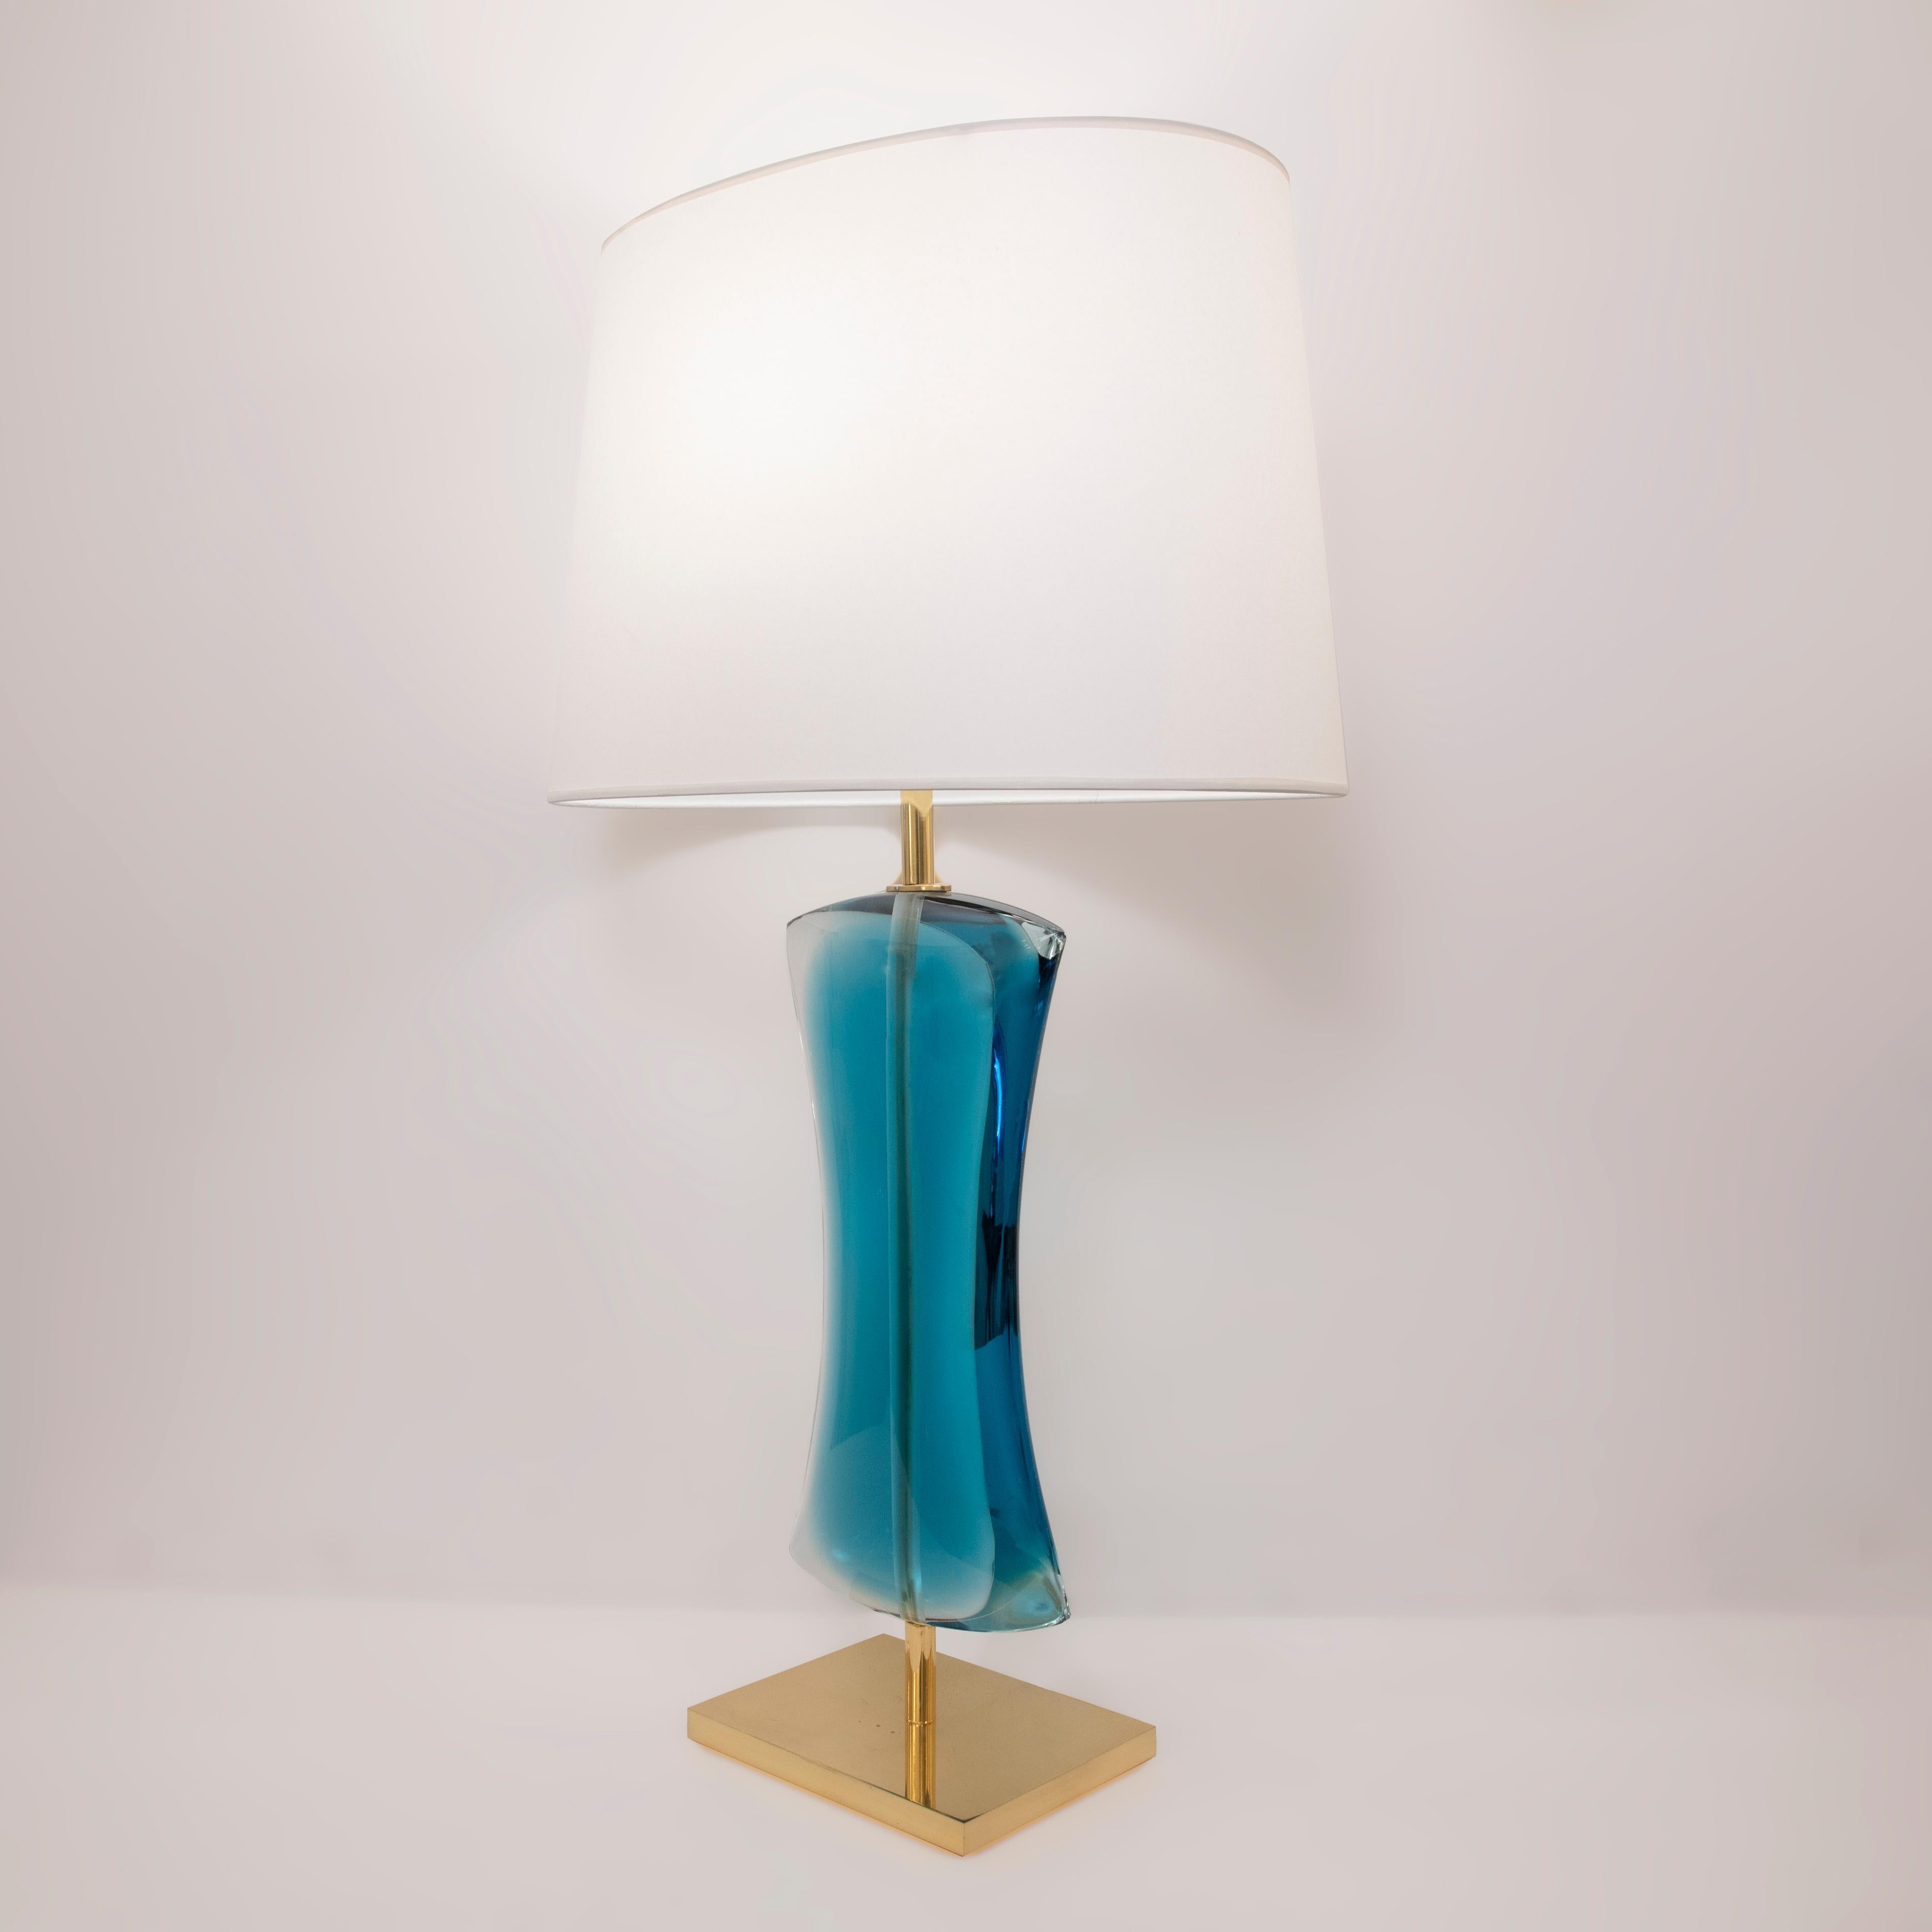 The Amante table lamp is minimalist representation of the human body with its sensual and curvaceous lines. Fabricated by several glass sheets bound together and then carved by hand. Shown in polished brass with blue glass. Shade not